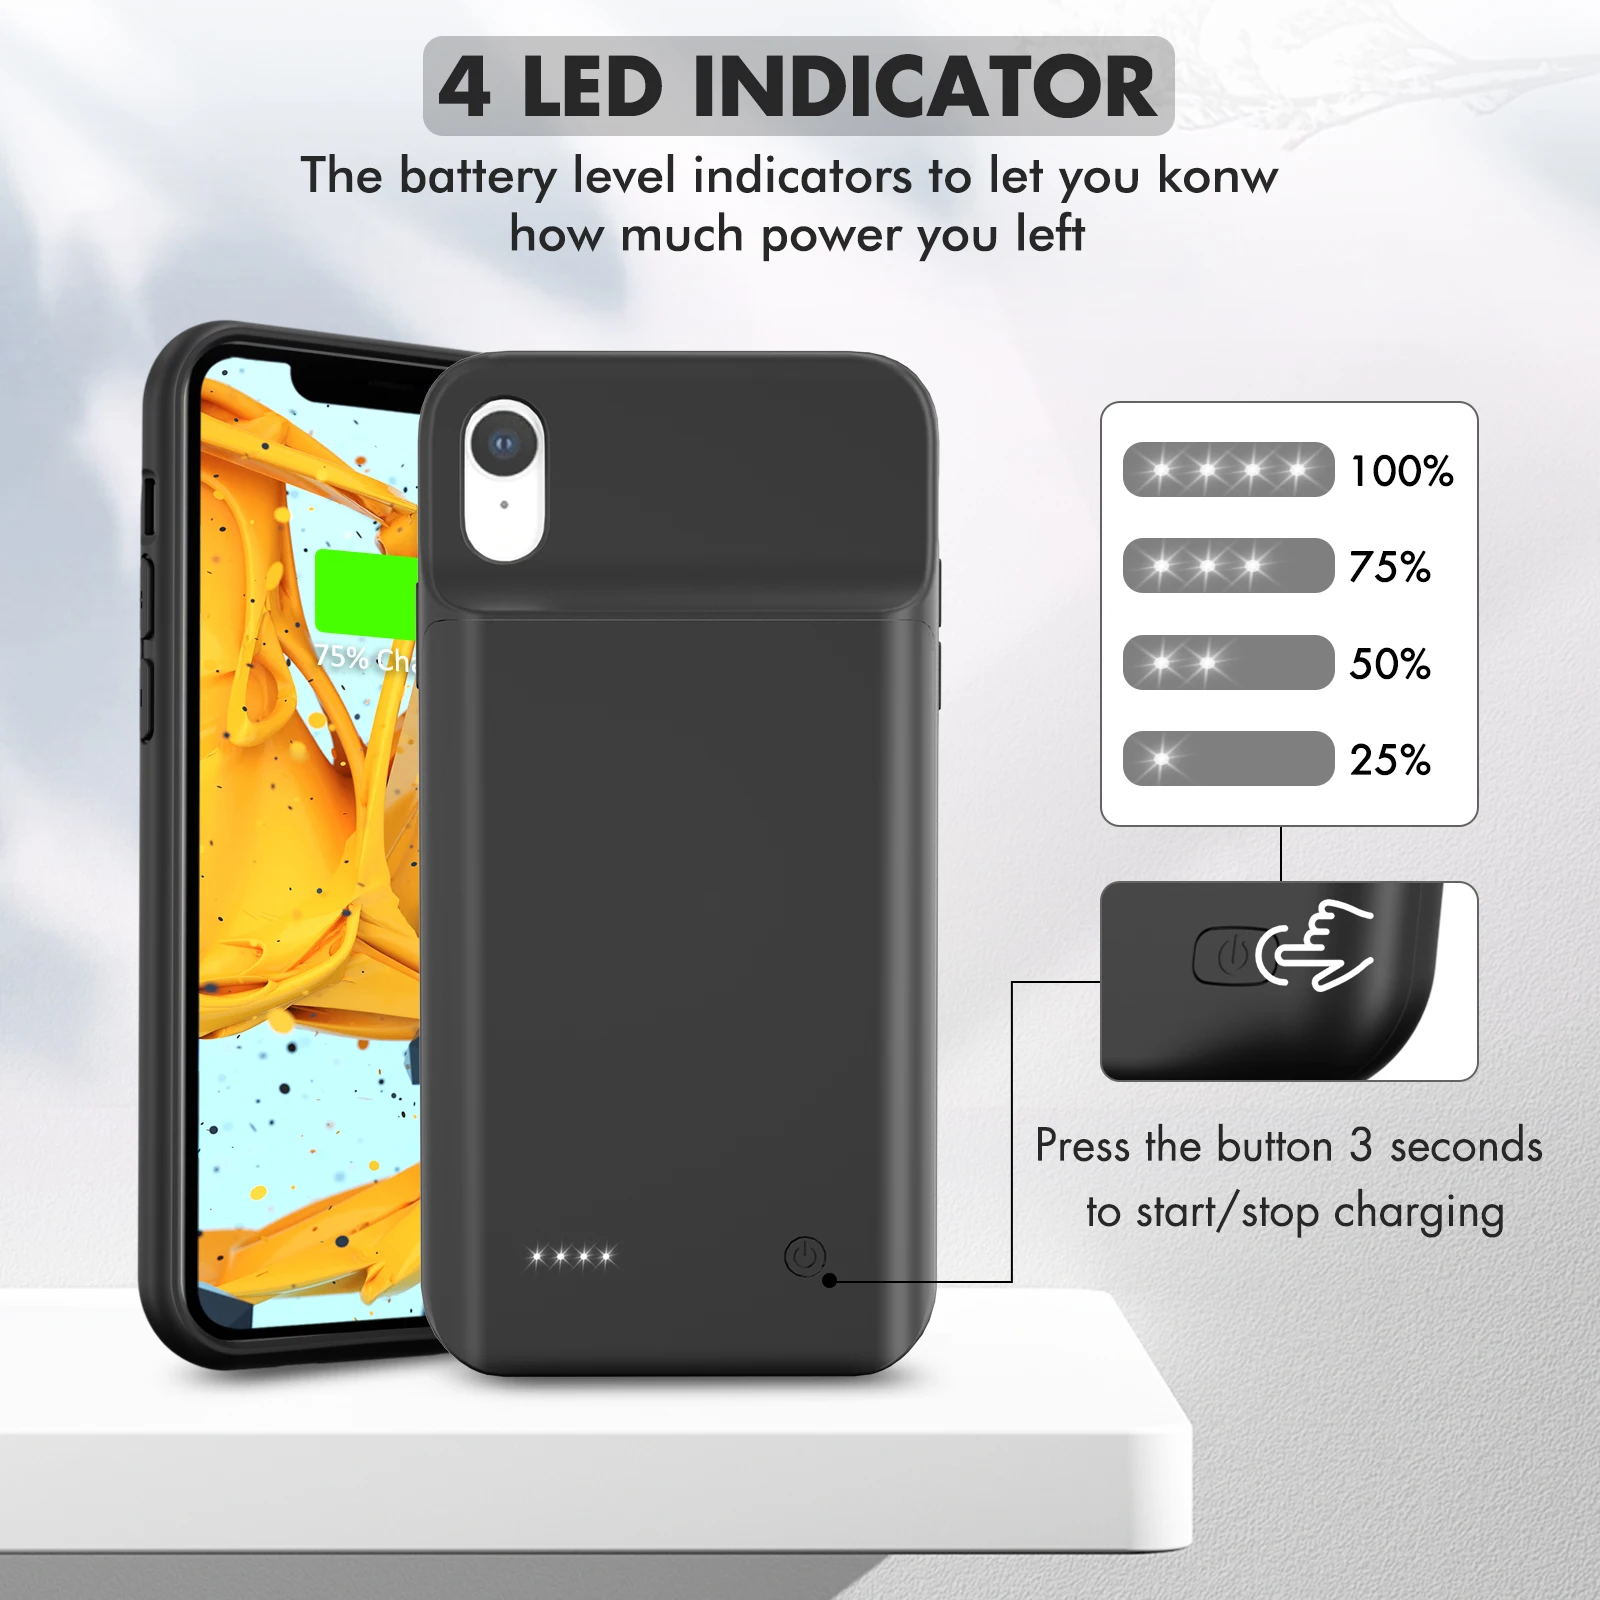 6000mAh External Battery Charger Case For iPhone XR Charging Case Portable Mobile Phone Housing Power Bank Backclip Fast Charger phone cases for iphone 11 Pro Max 